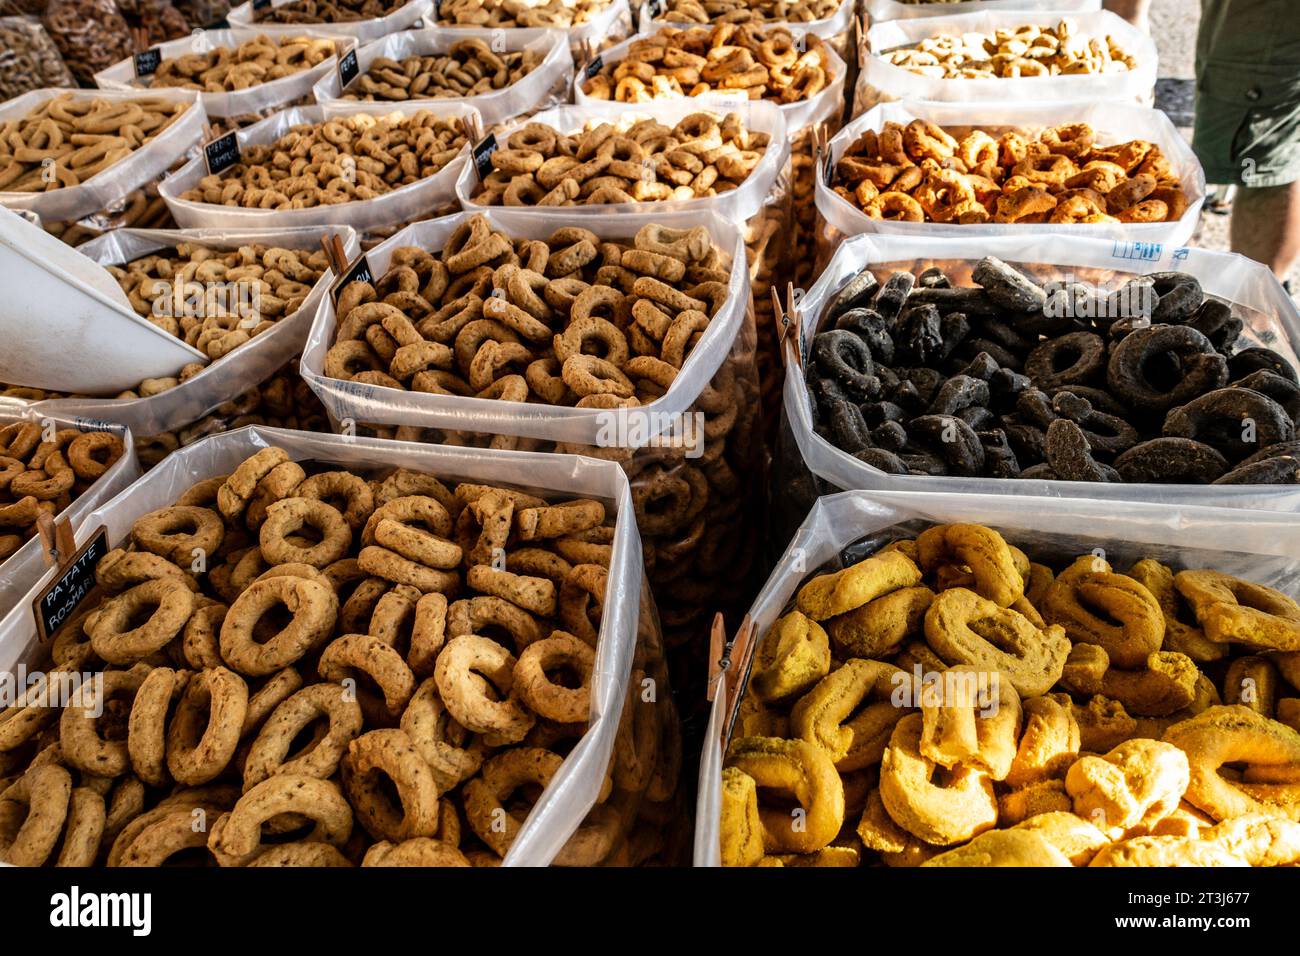 Containers of Tarallini, traditional bread bites on sale at a market stall in Polignano a Mare, Italy. Stock Photo